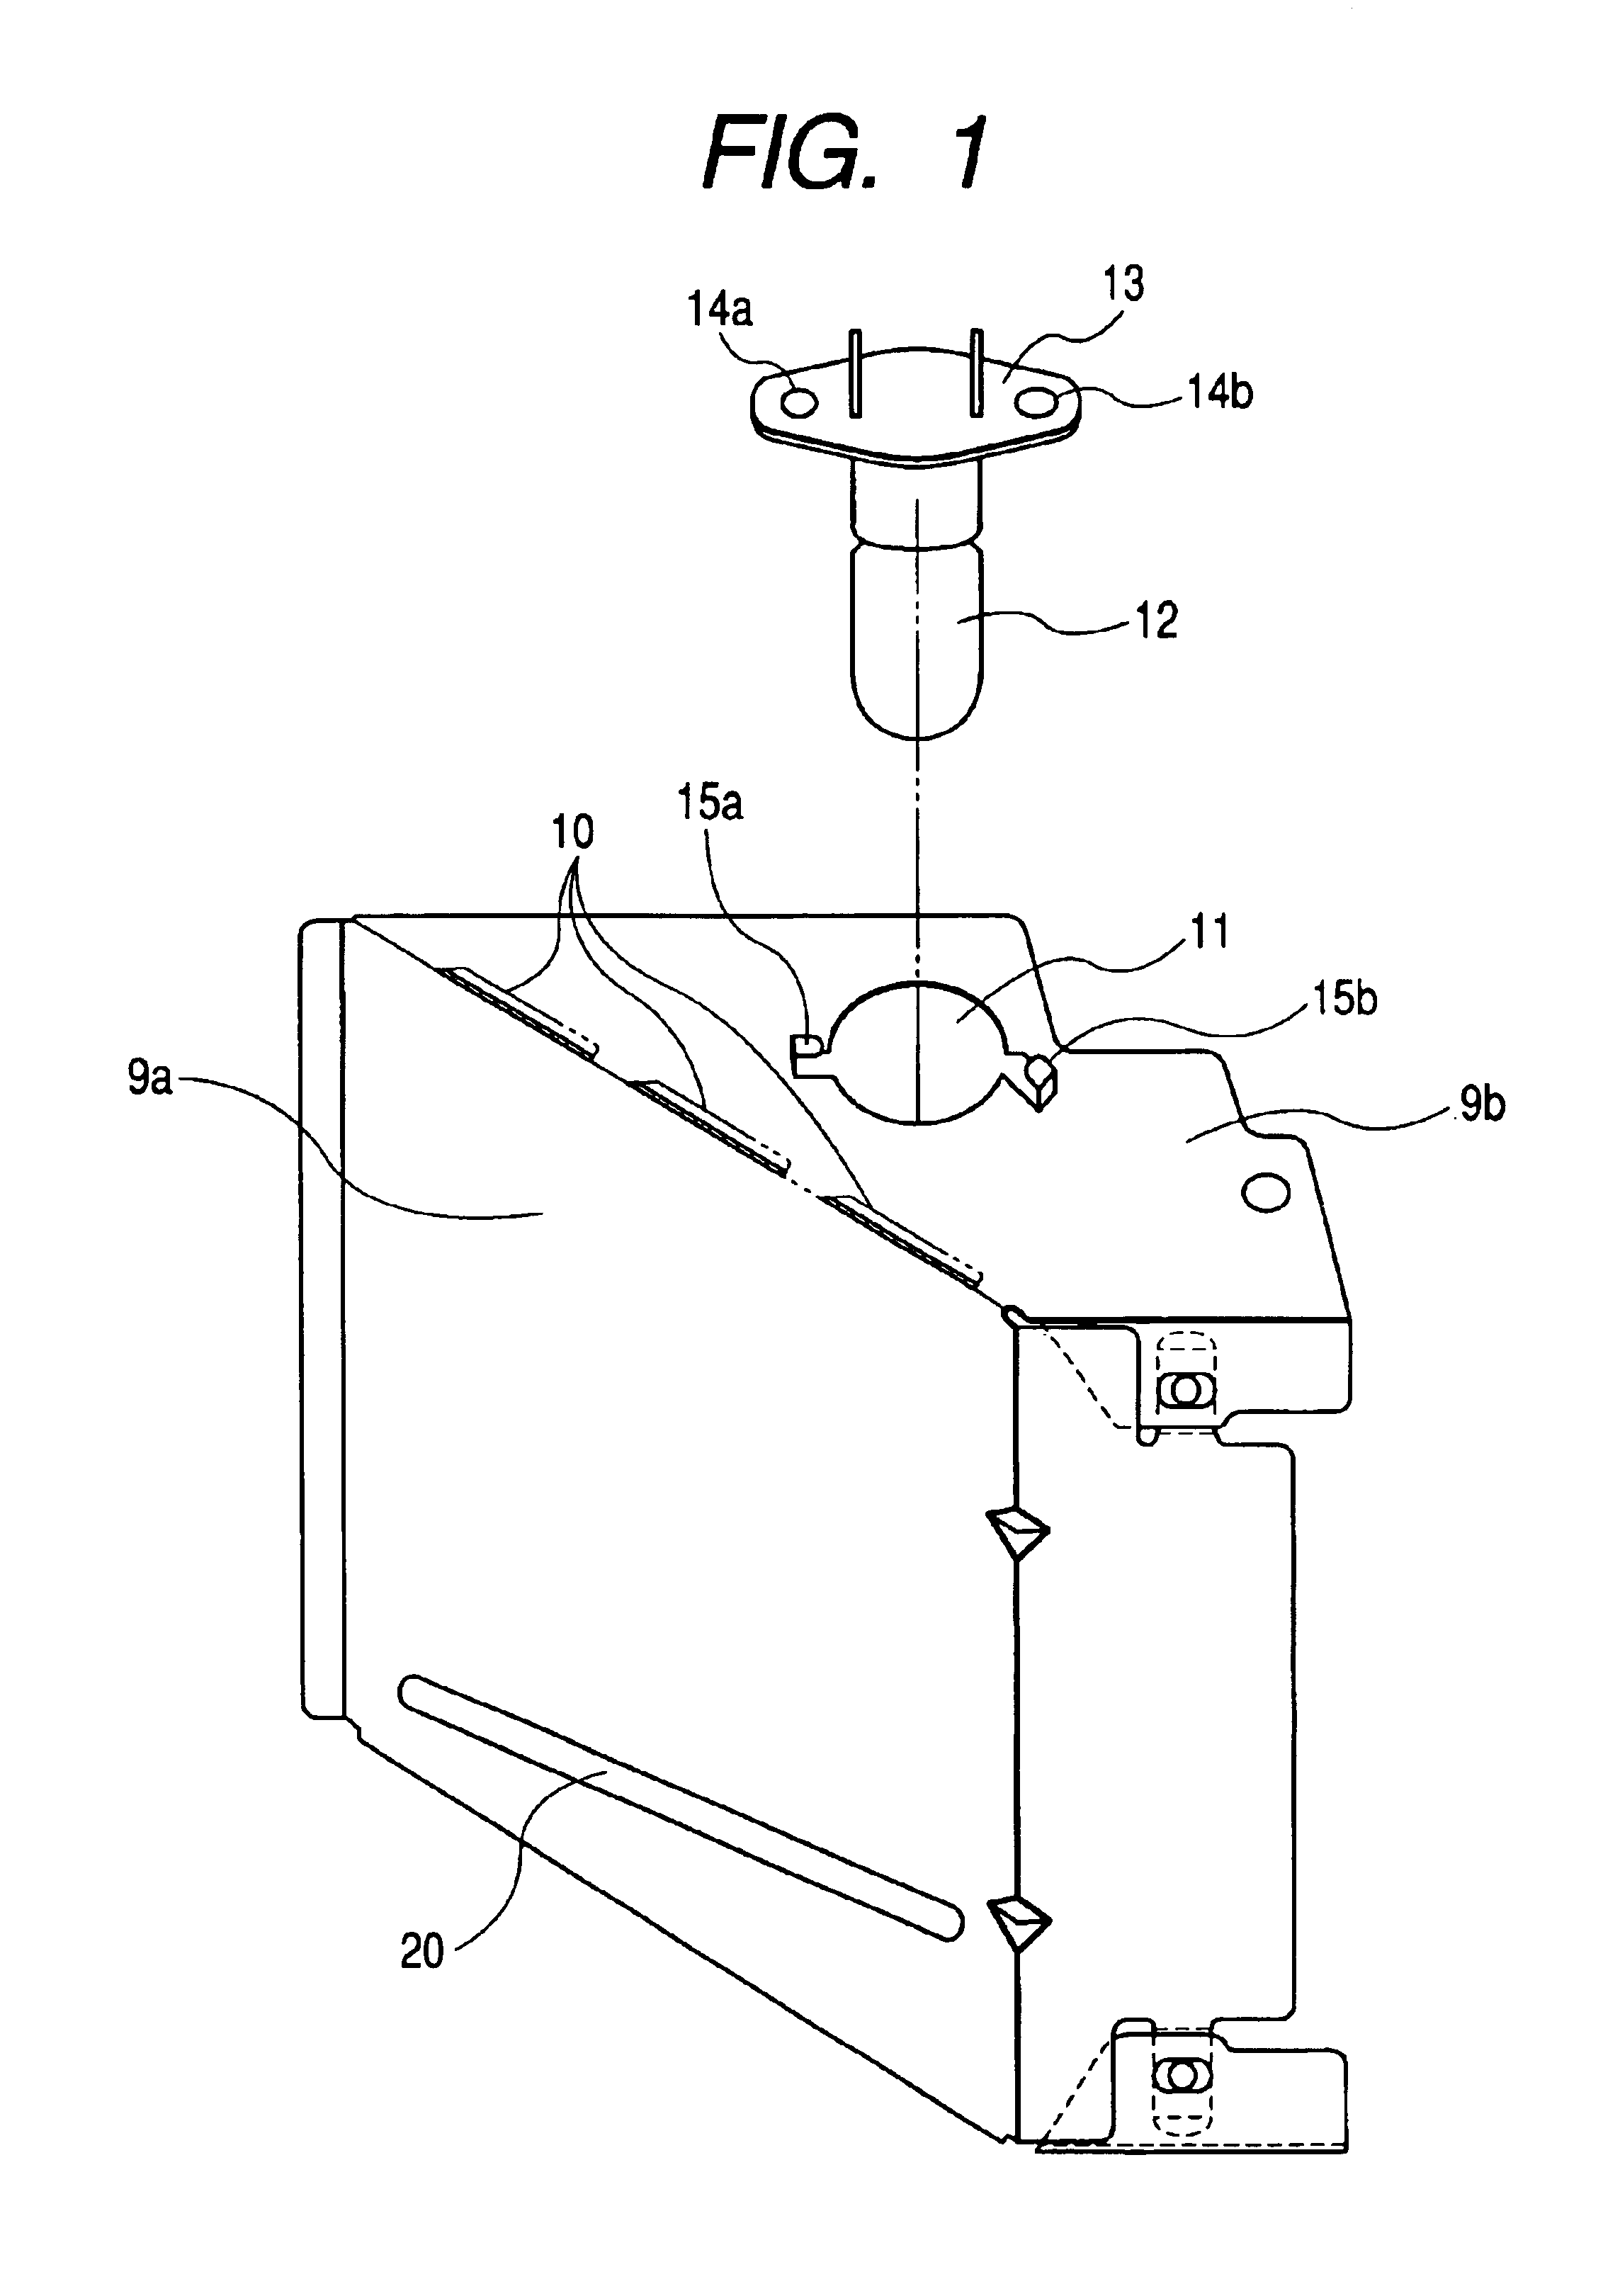 High-frequency heating apparatus with illumination device